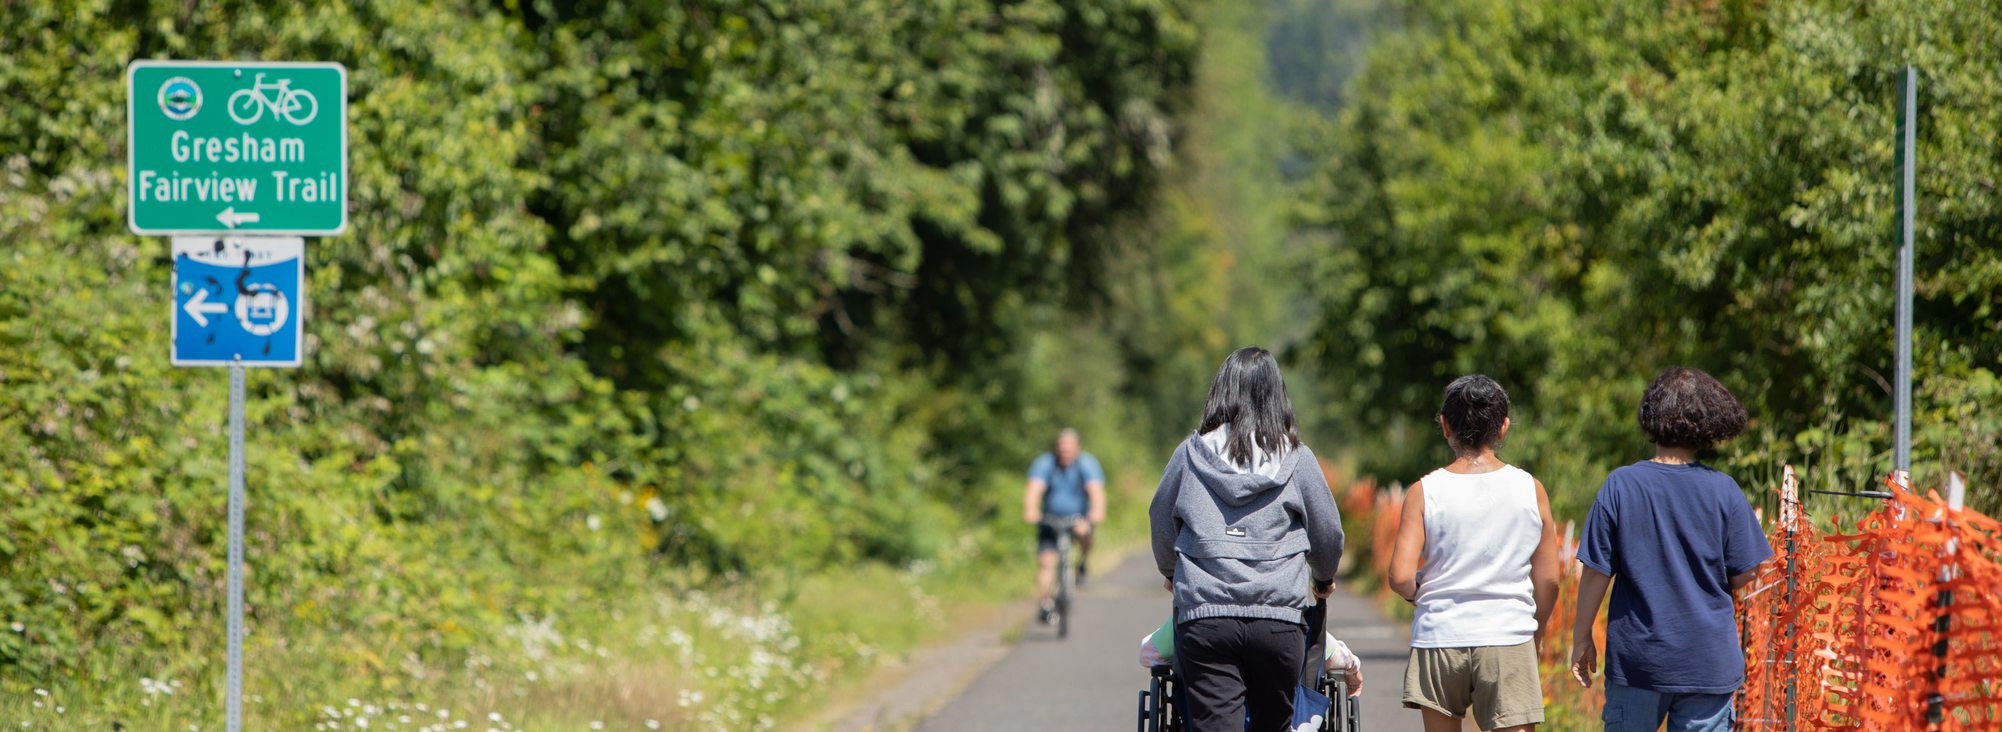 A group of three people walk along the Gresham Fairview Trail. One person pushes another person in a wheelchair. A person on a bike is approaching from further down the trail. Trees line both sides of the trail on a sunny day.